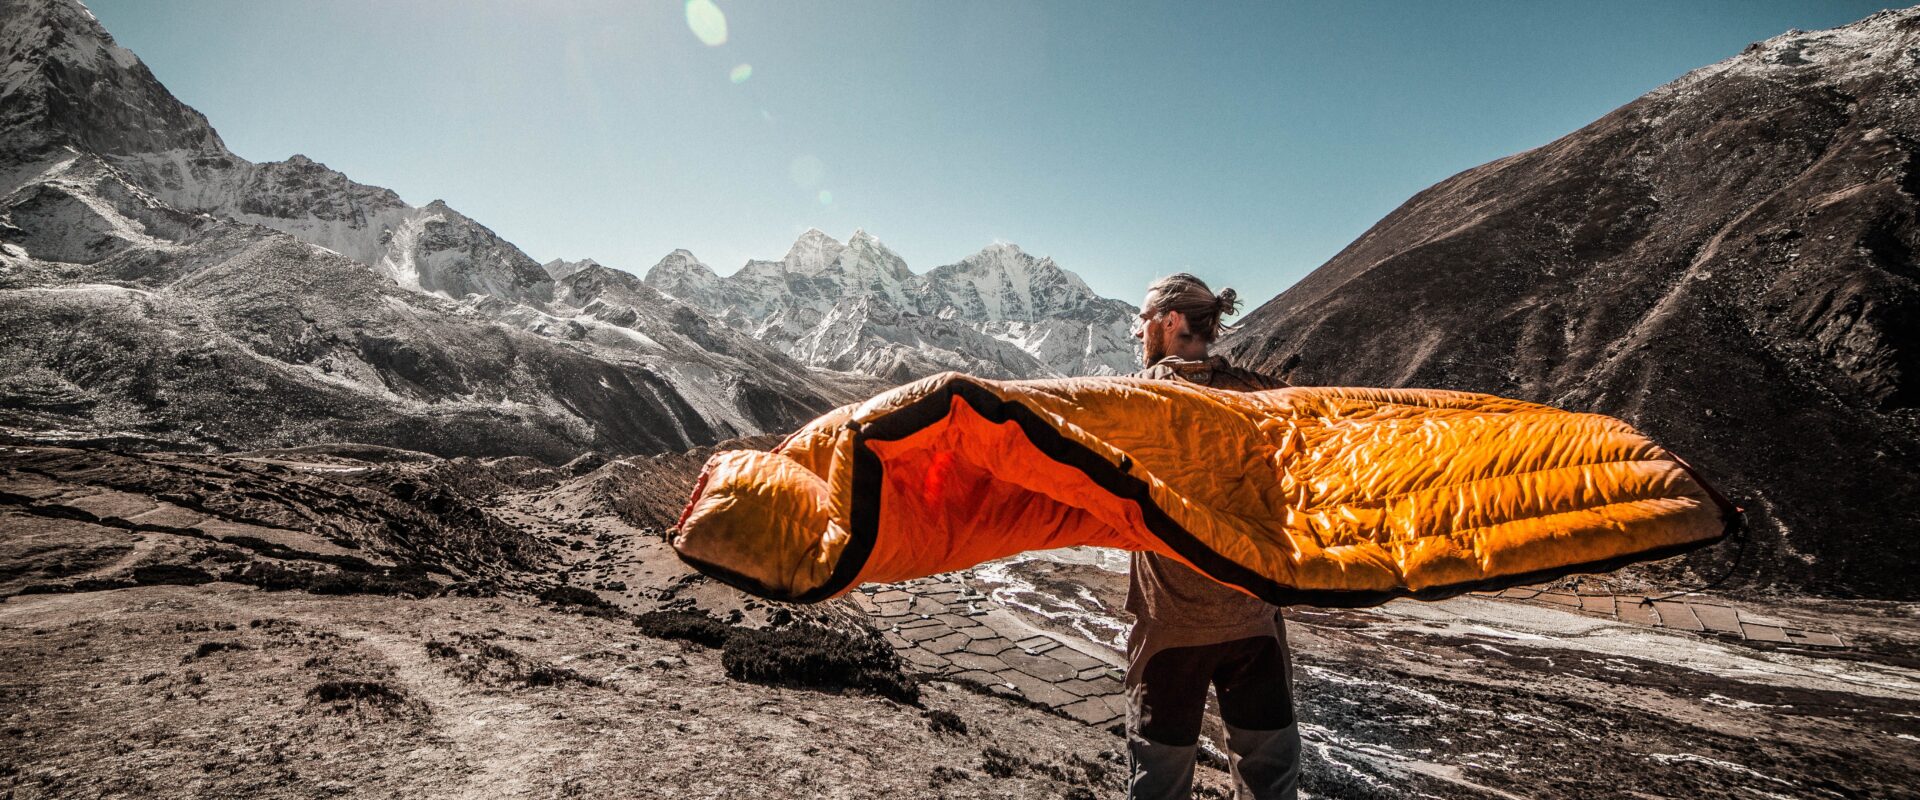 16 Top Sleeping Bags for Backpacking and Camping